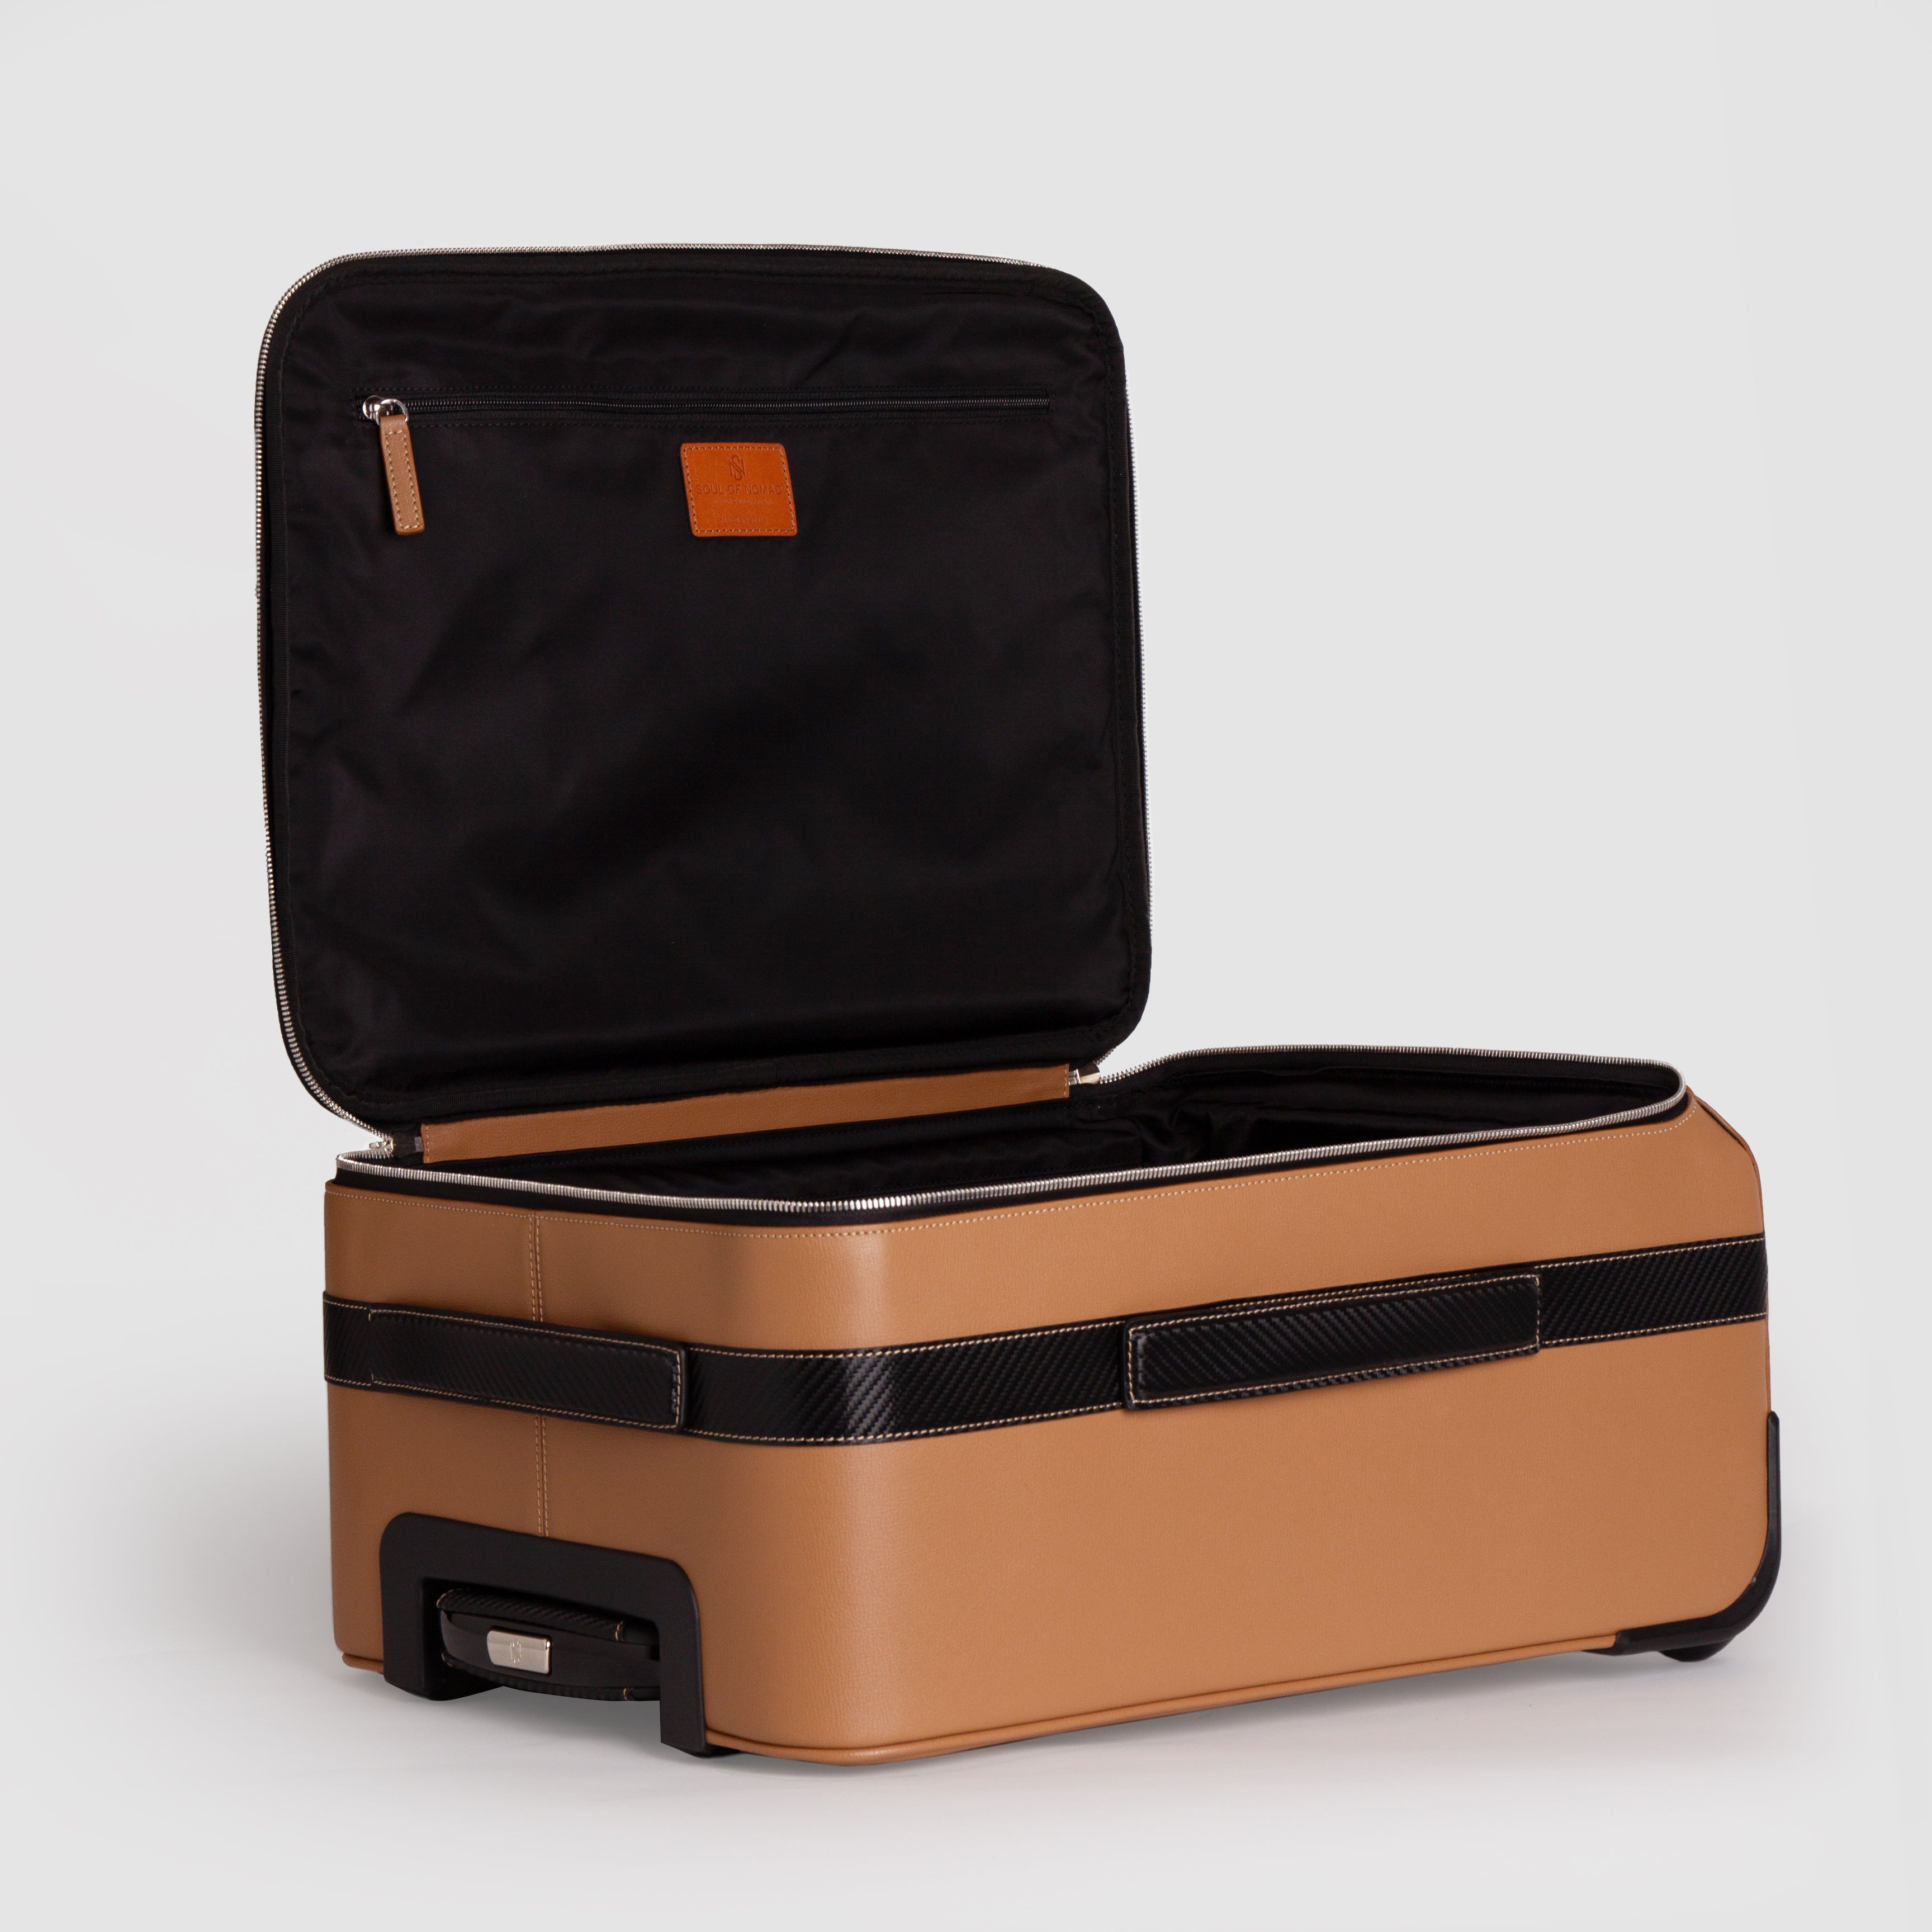 Soul of Nomad Brown Carry-On Luggage